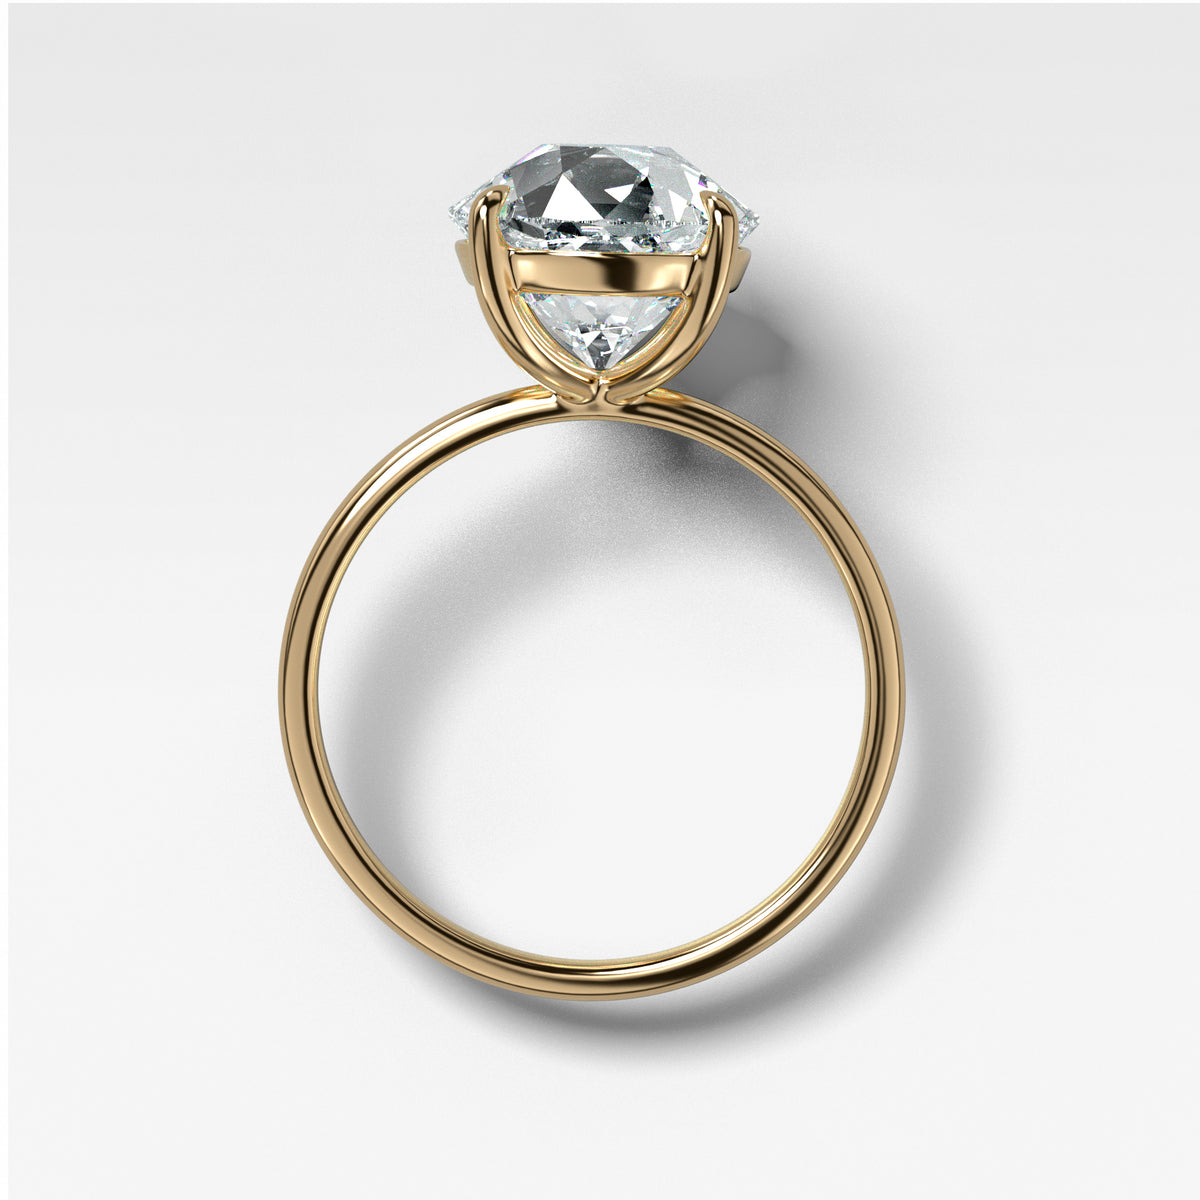 Thin + Simple Solitaire Engagement Ring With Old Euro Cut Diamond